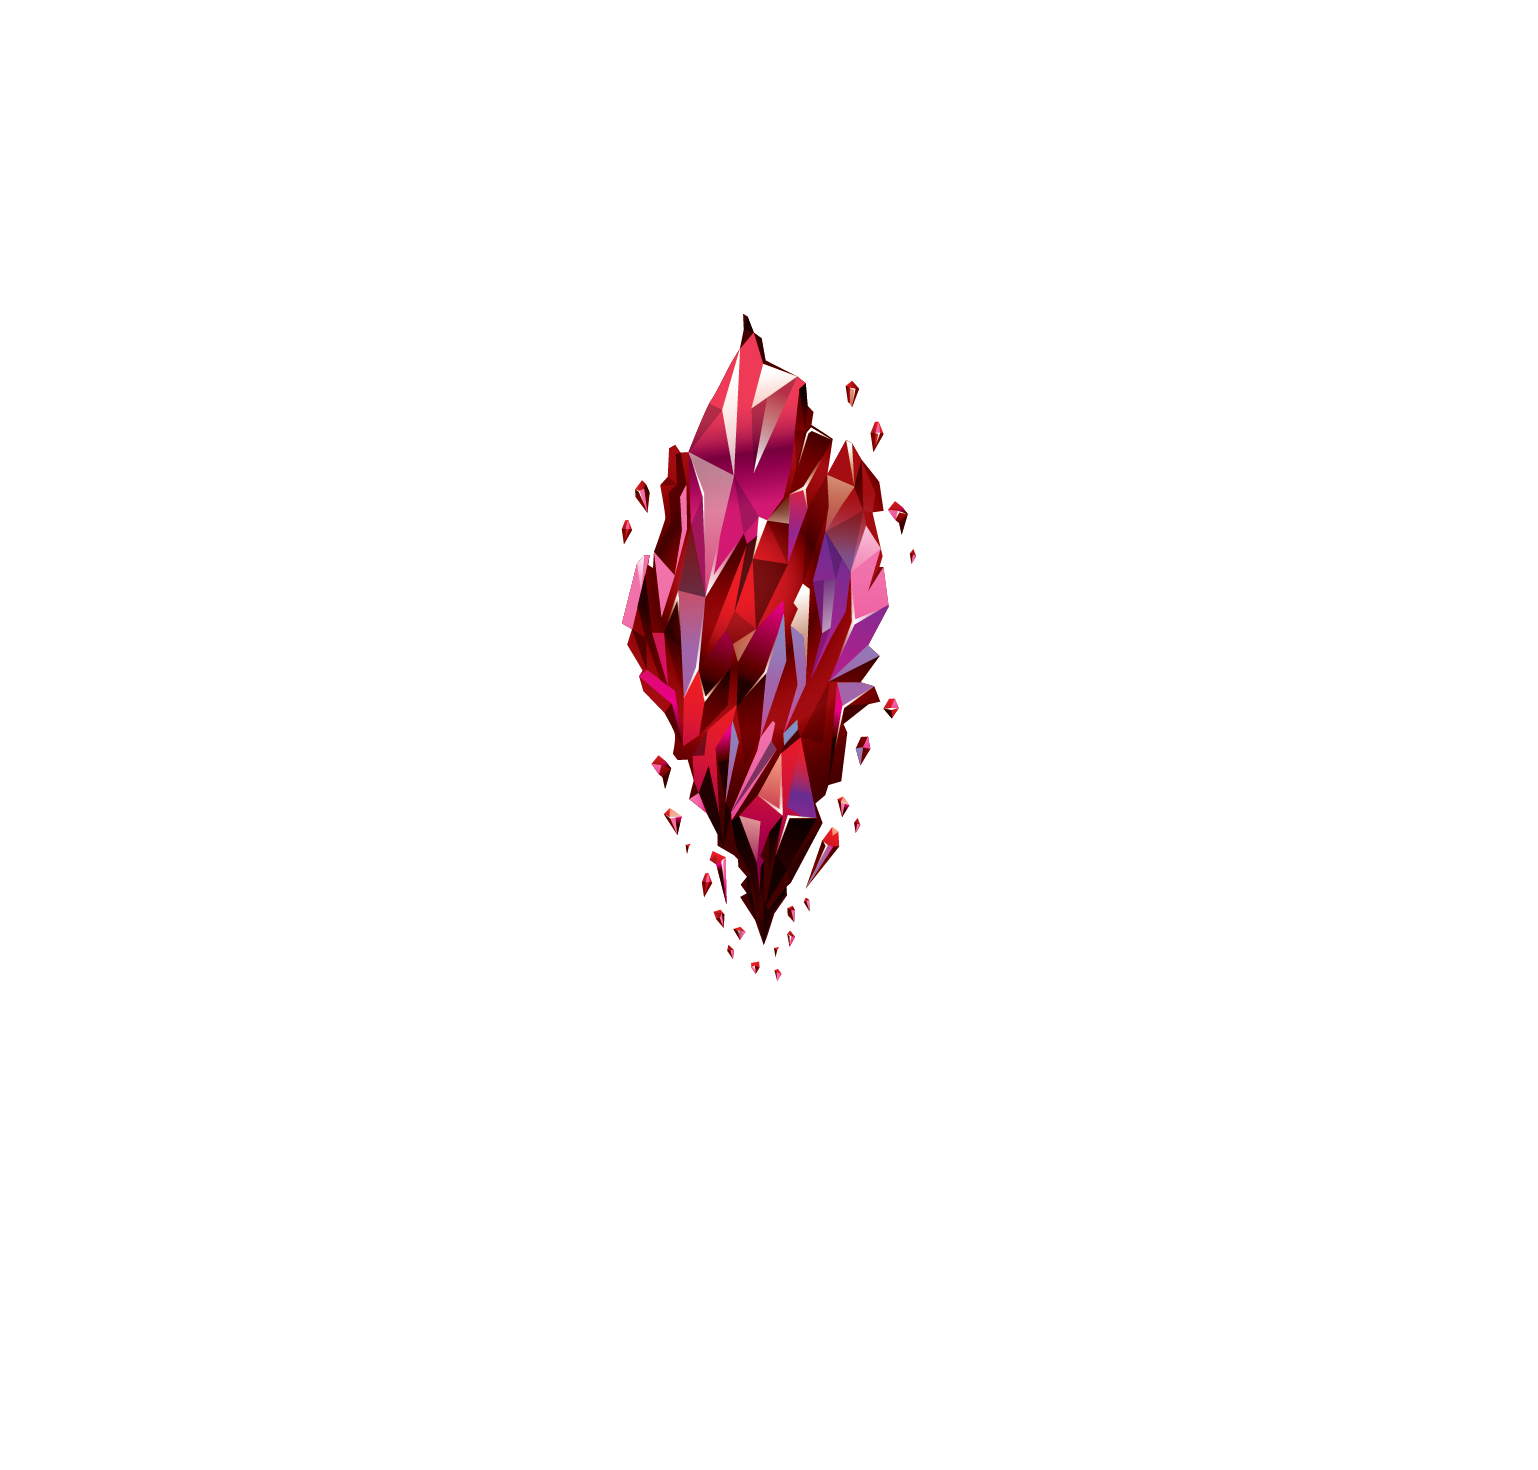 A New Experience - Warshard